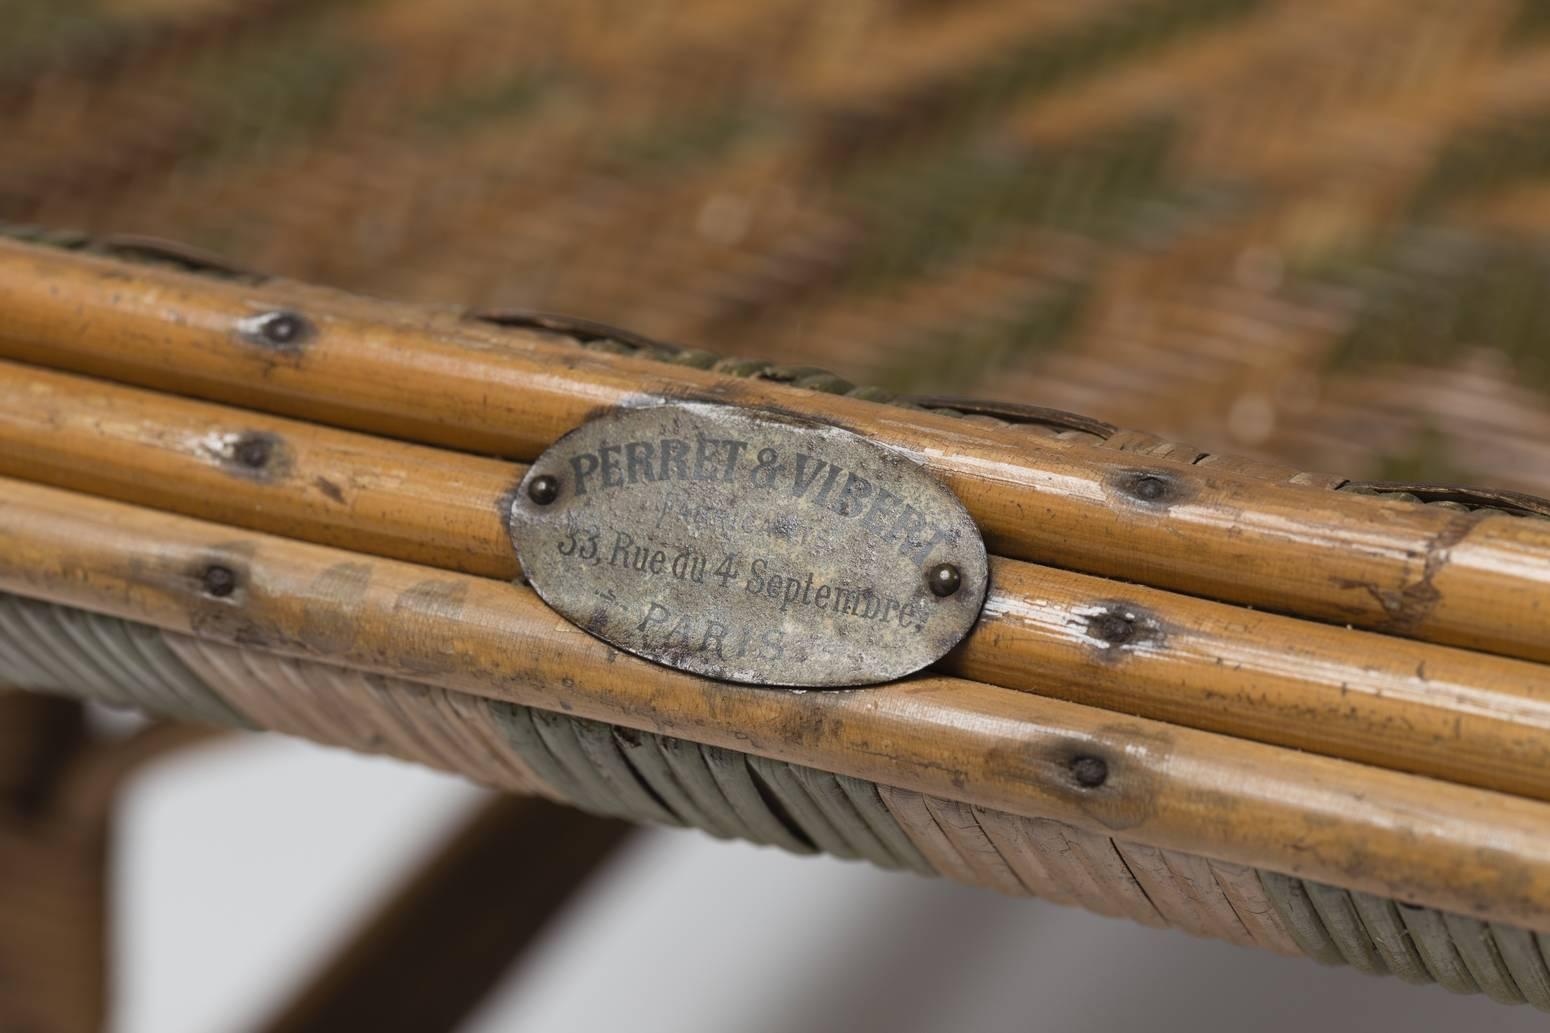 Beautiful 19th century French chaise longue by Perret et Vibert.
The piece is composed of green and natural braided rattan on a bamboo structure.
With Perret et Vibert metal label.